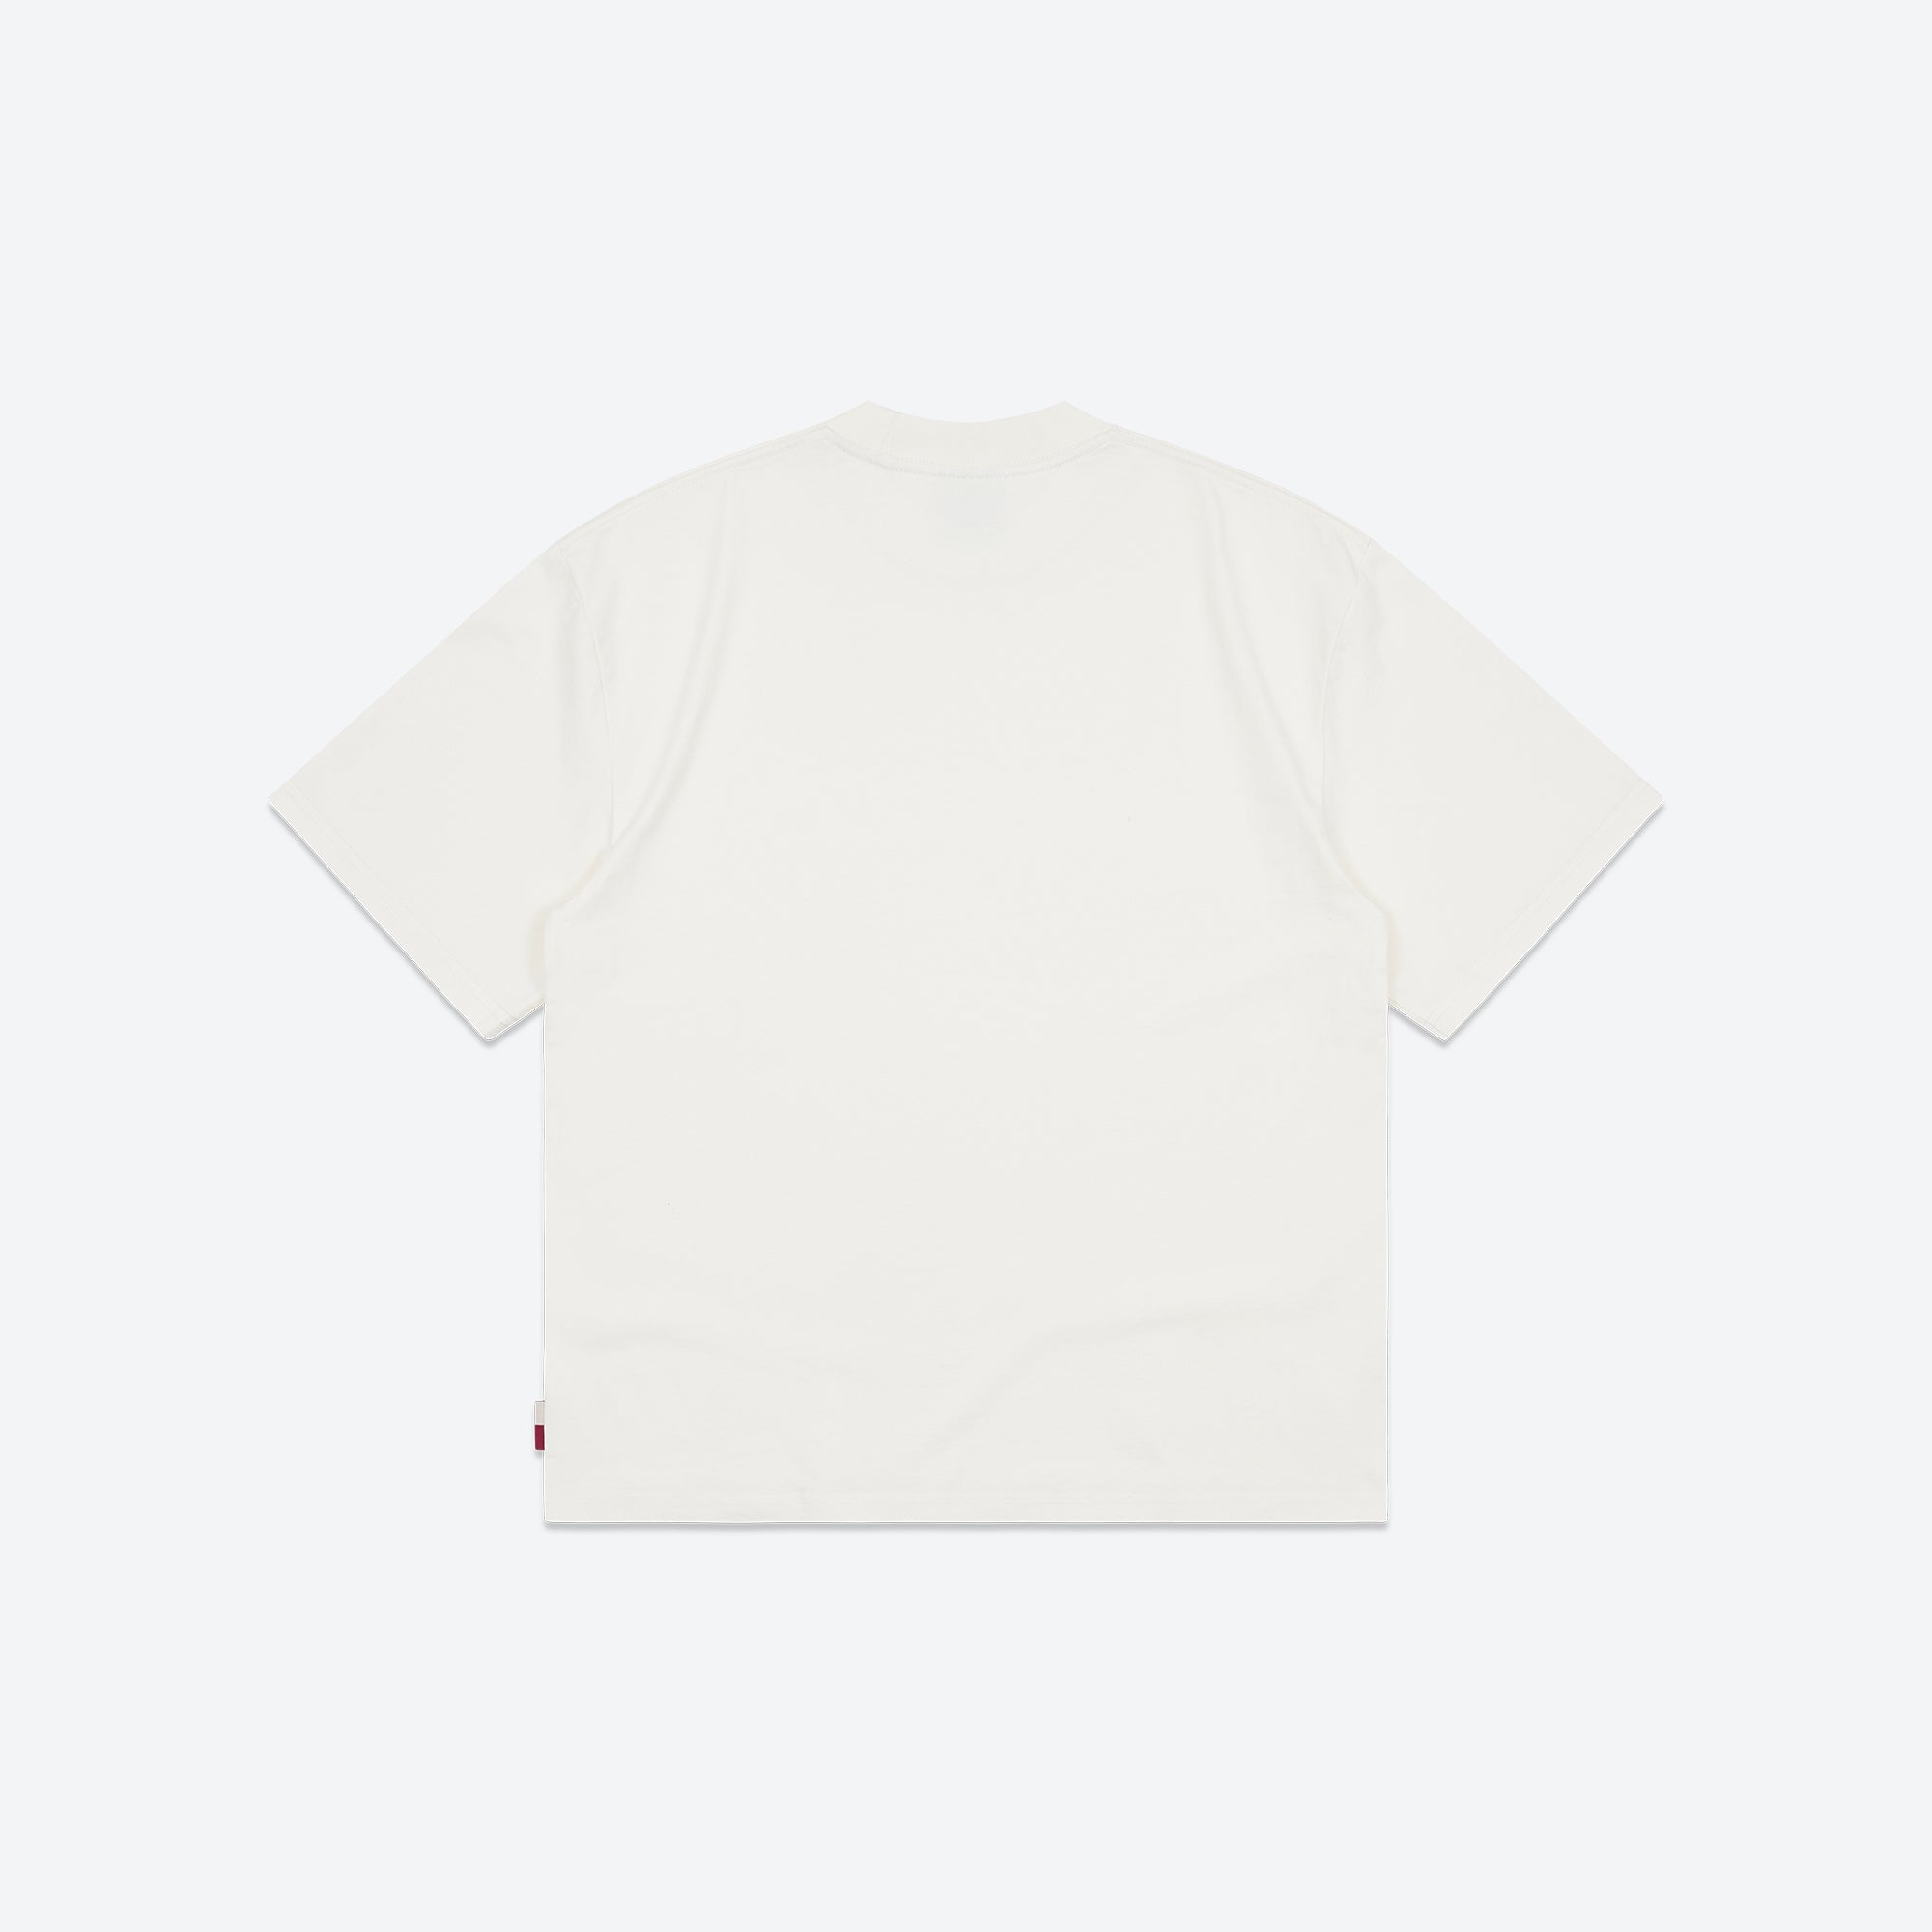 Alfred's Apartment - Capital Tee - Natural